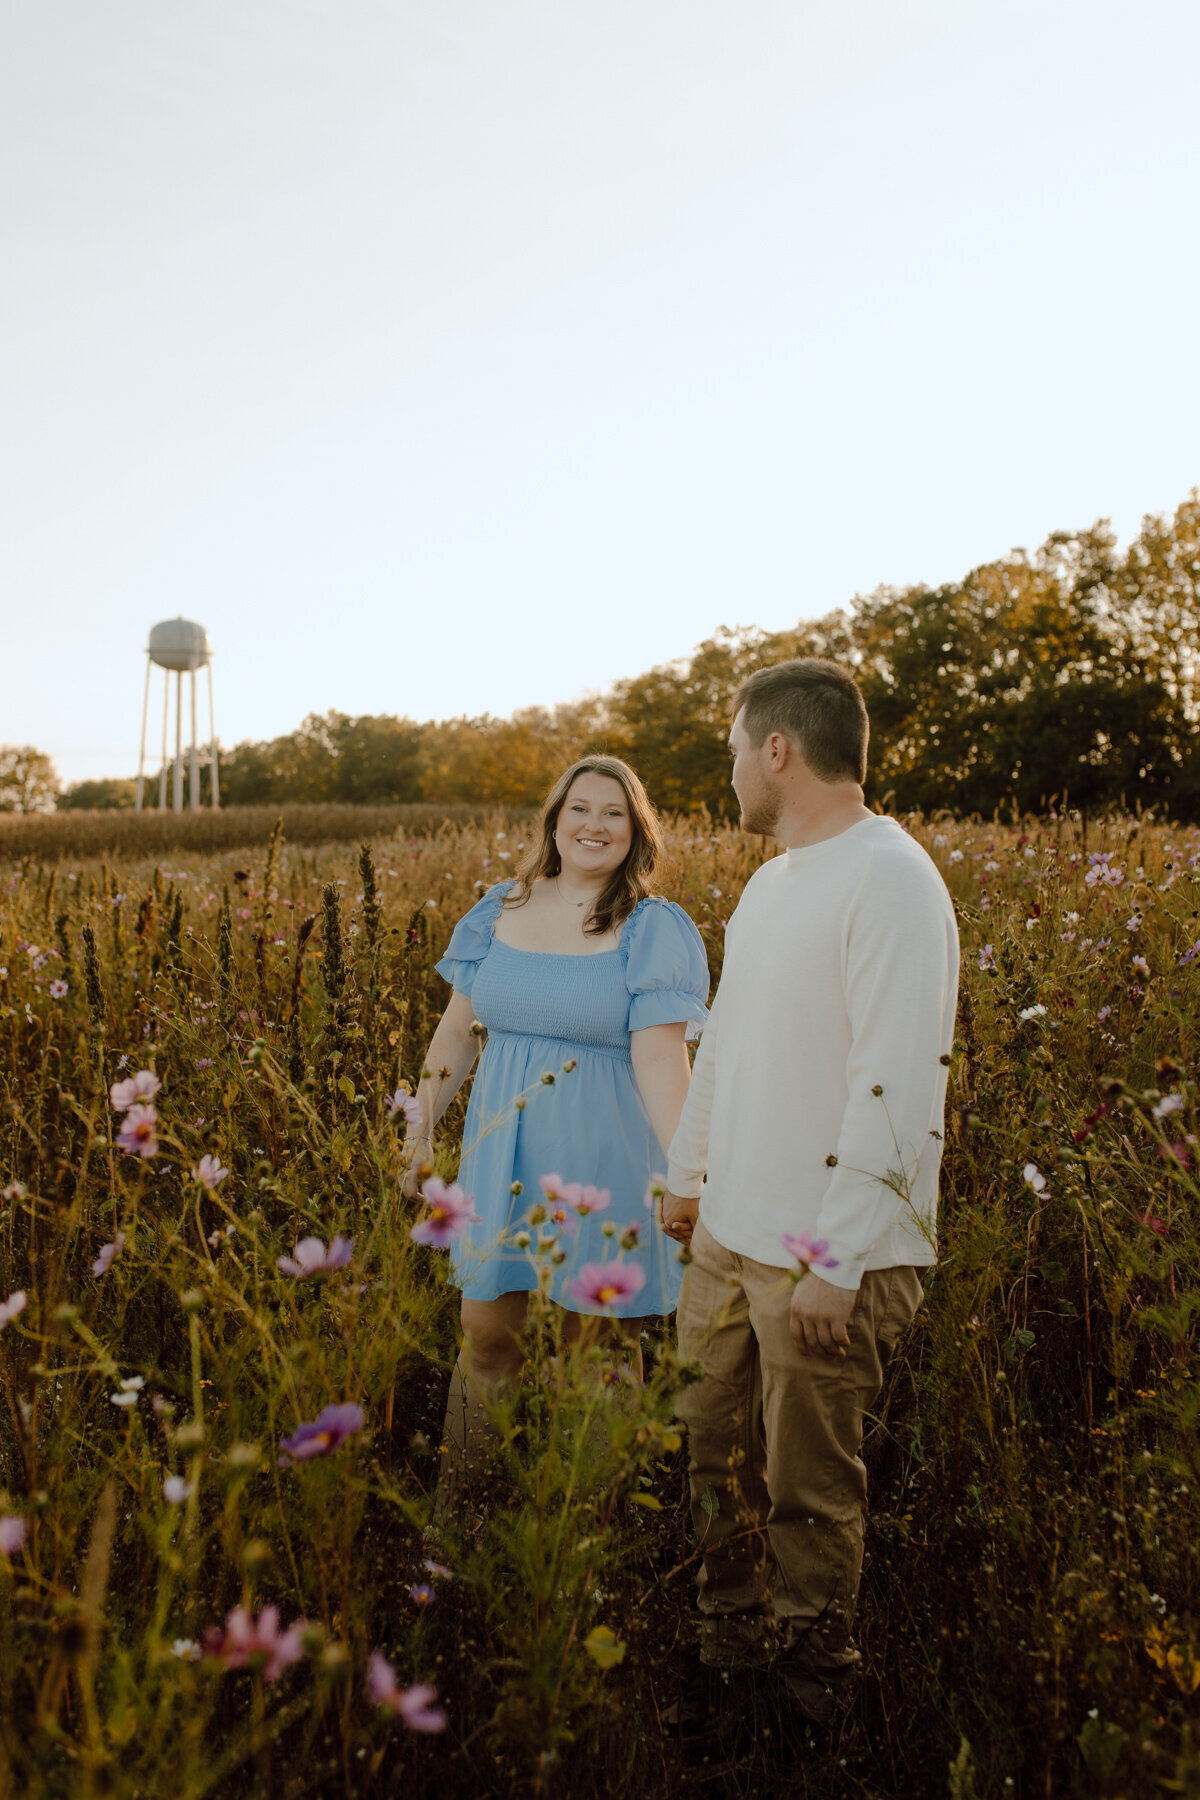 Kentucky Wedding Photographer, Couples Photographer, Winchester, Mt Sterling, Mount Sterling, Morehead, West Liberty, Paris, Irvine, Stanton KY